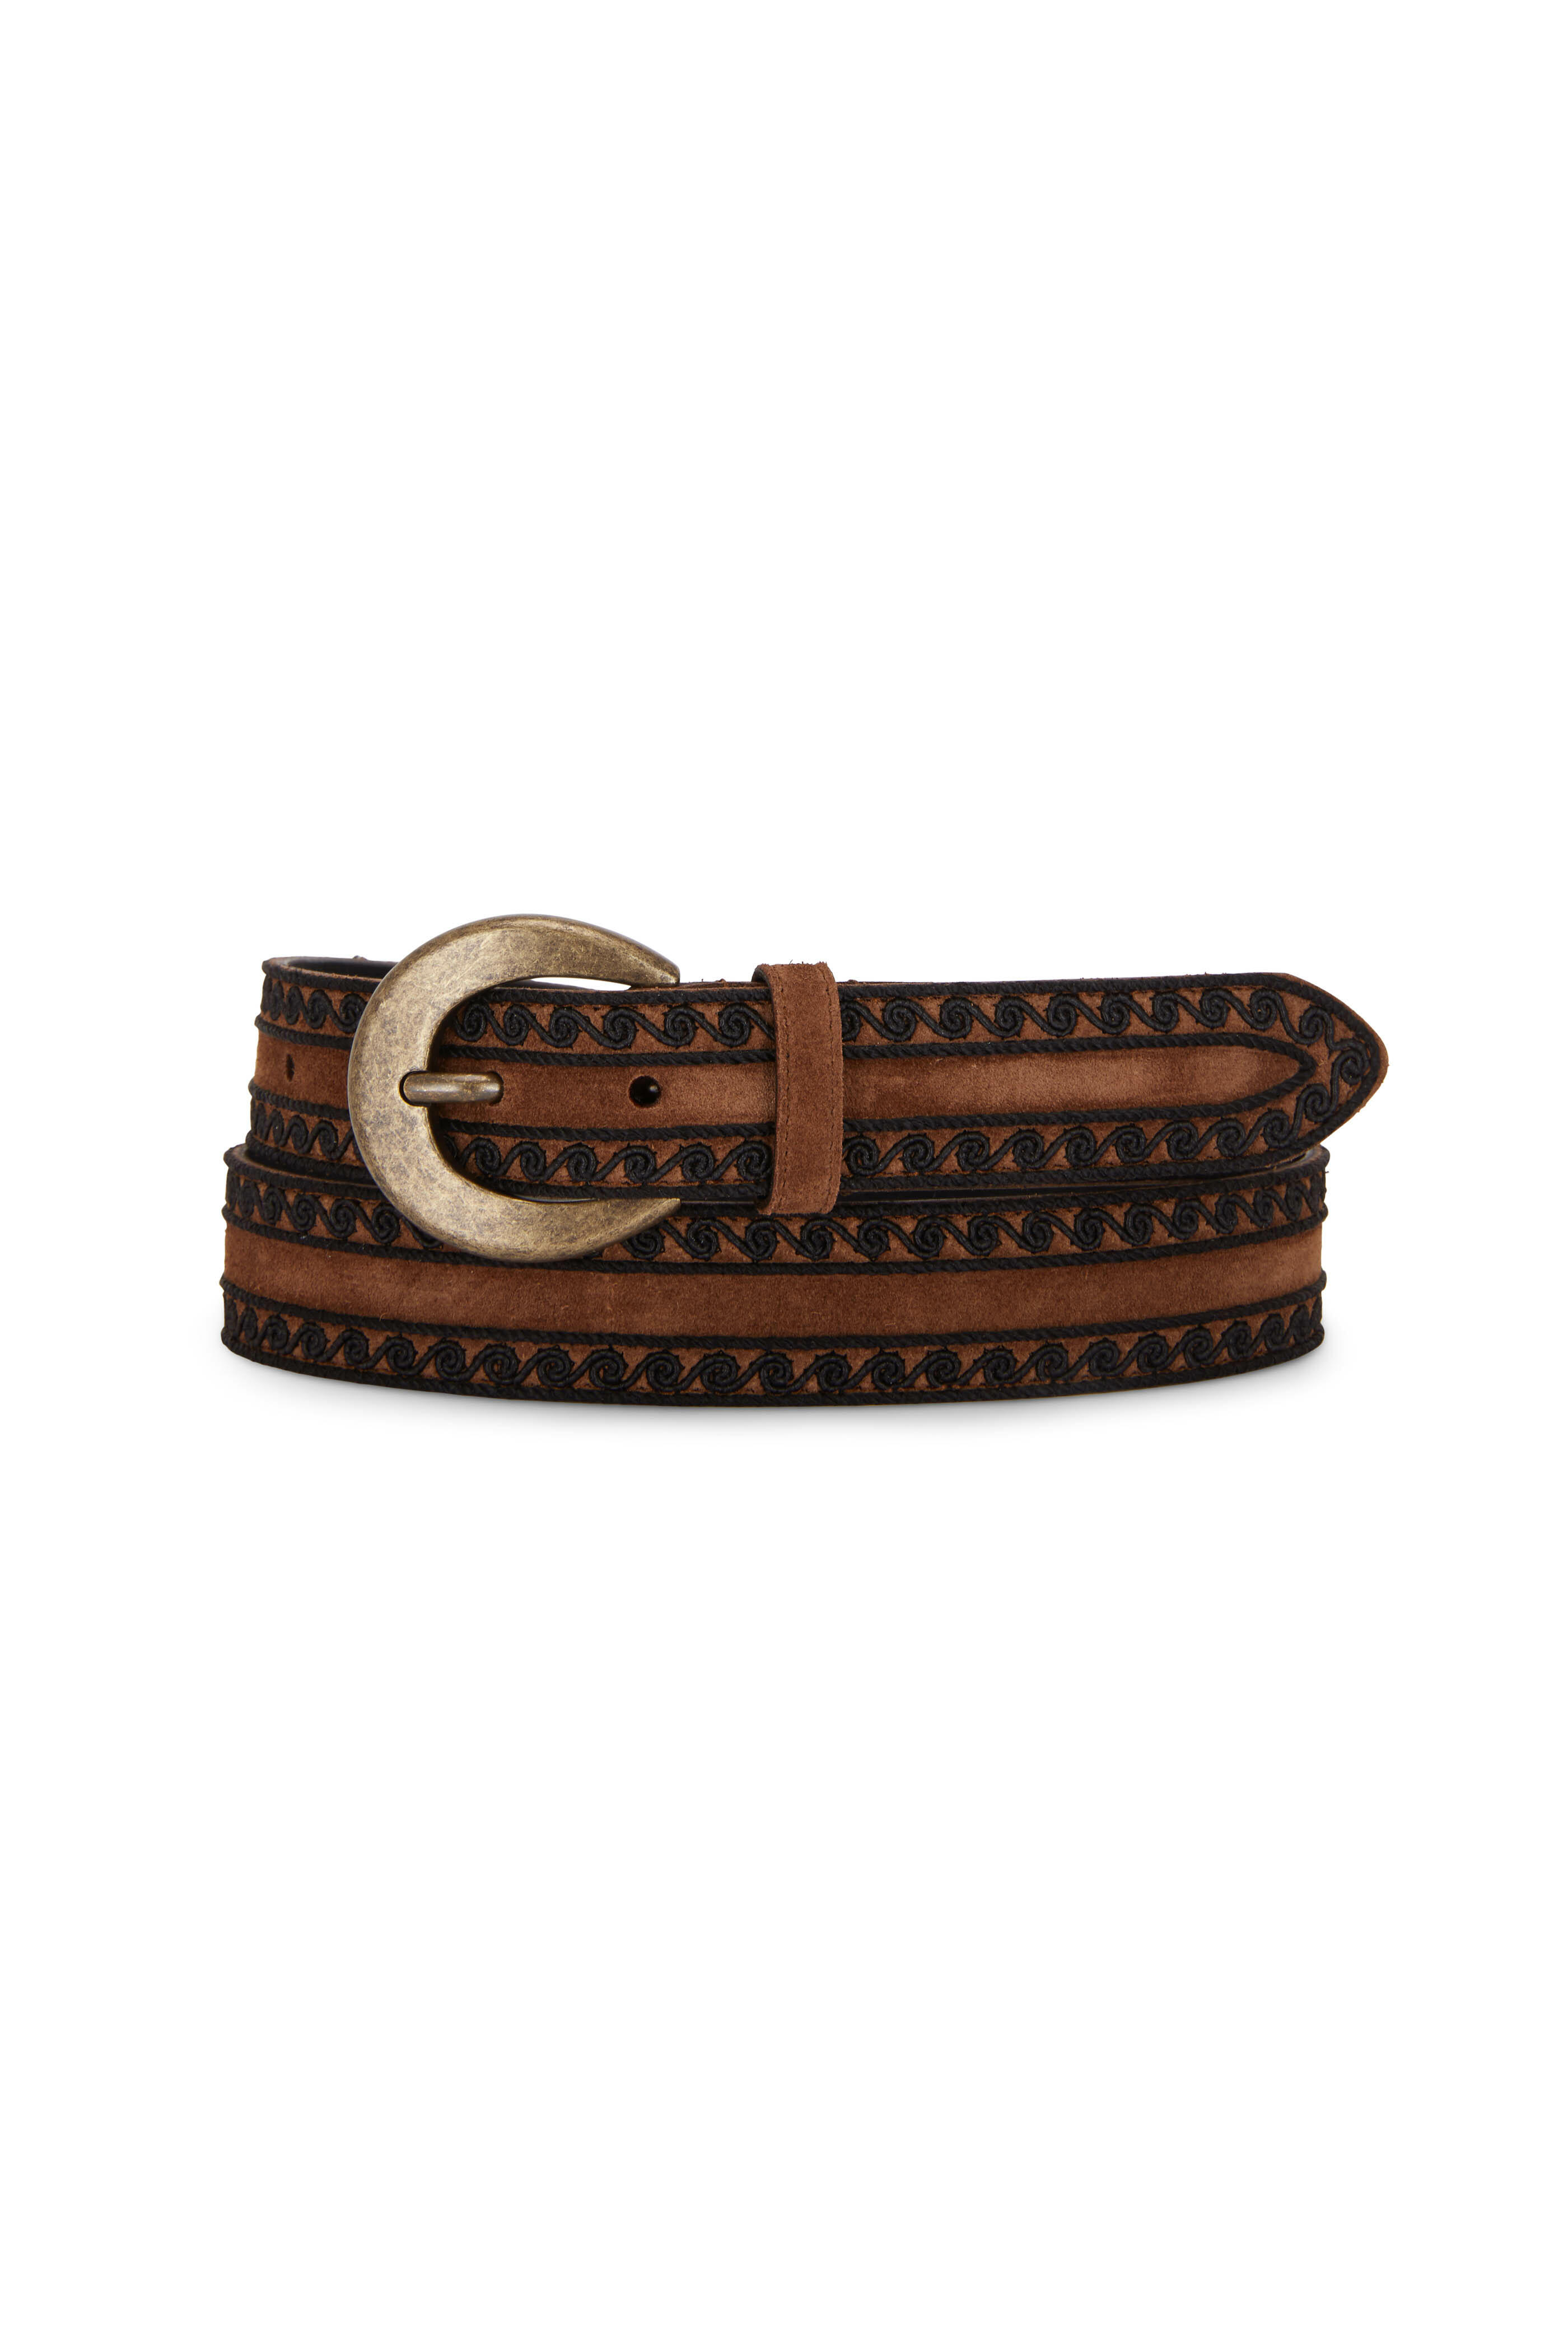 Saint Laurent YSL Belt Brown in Suede with Gold-tone - US